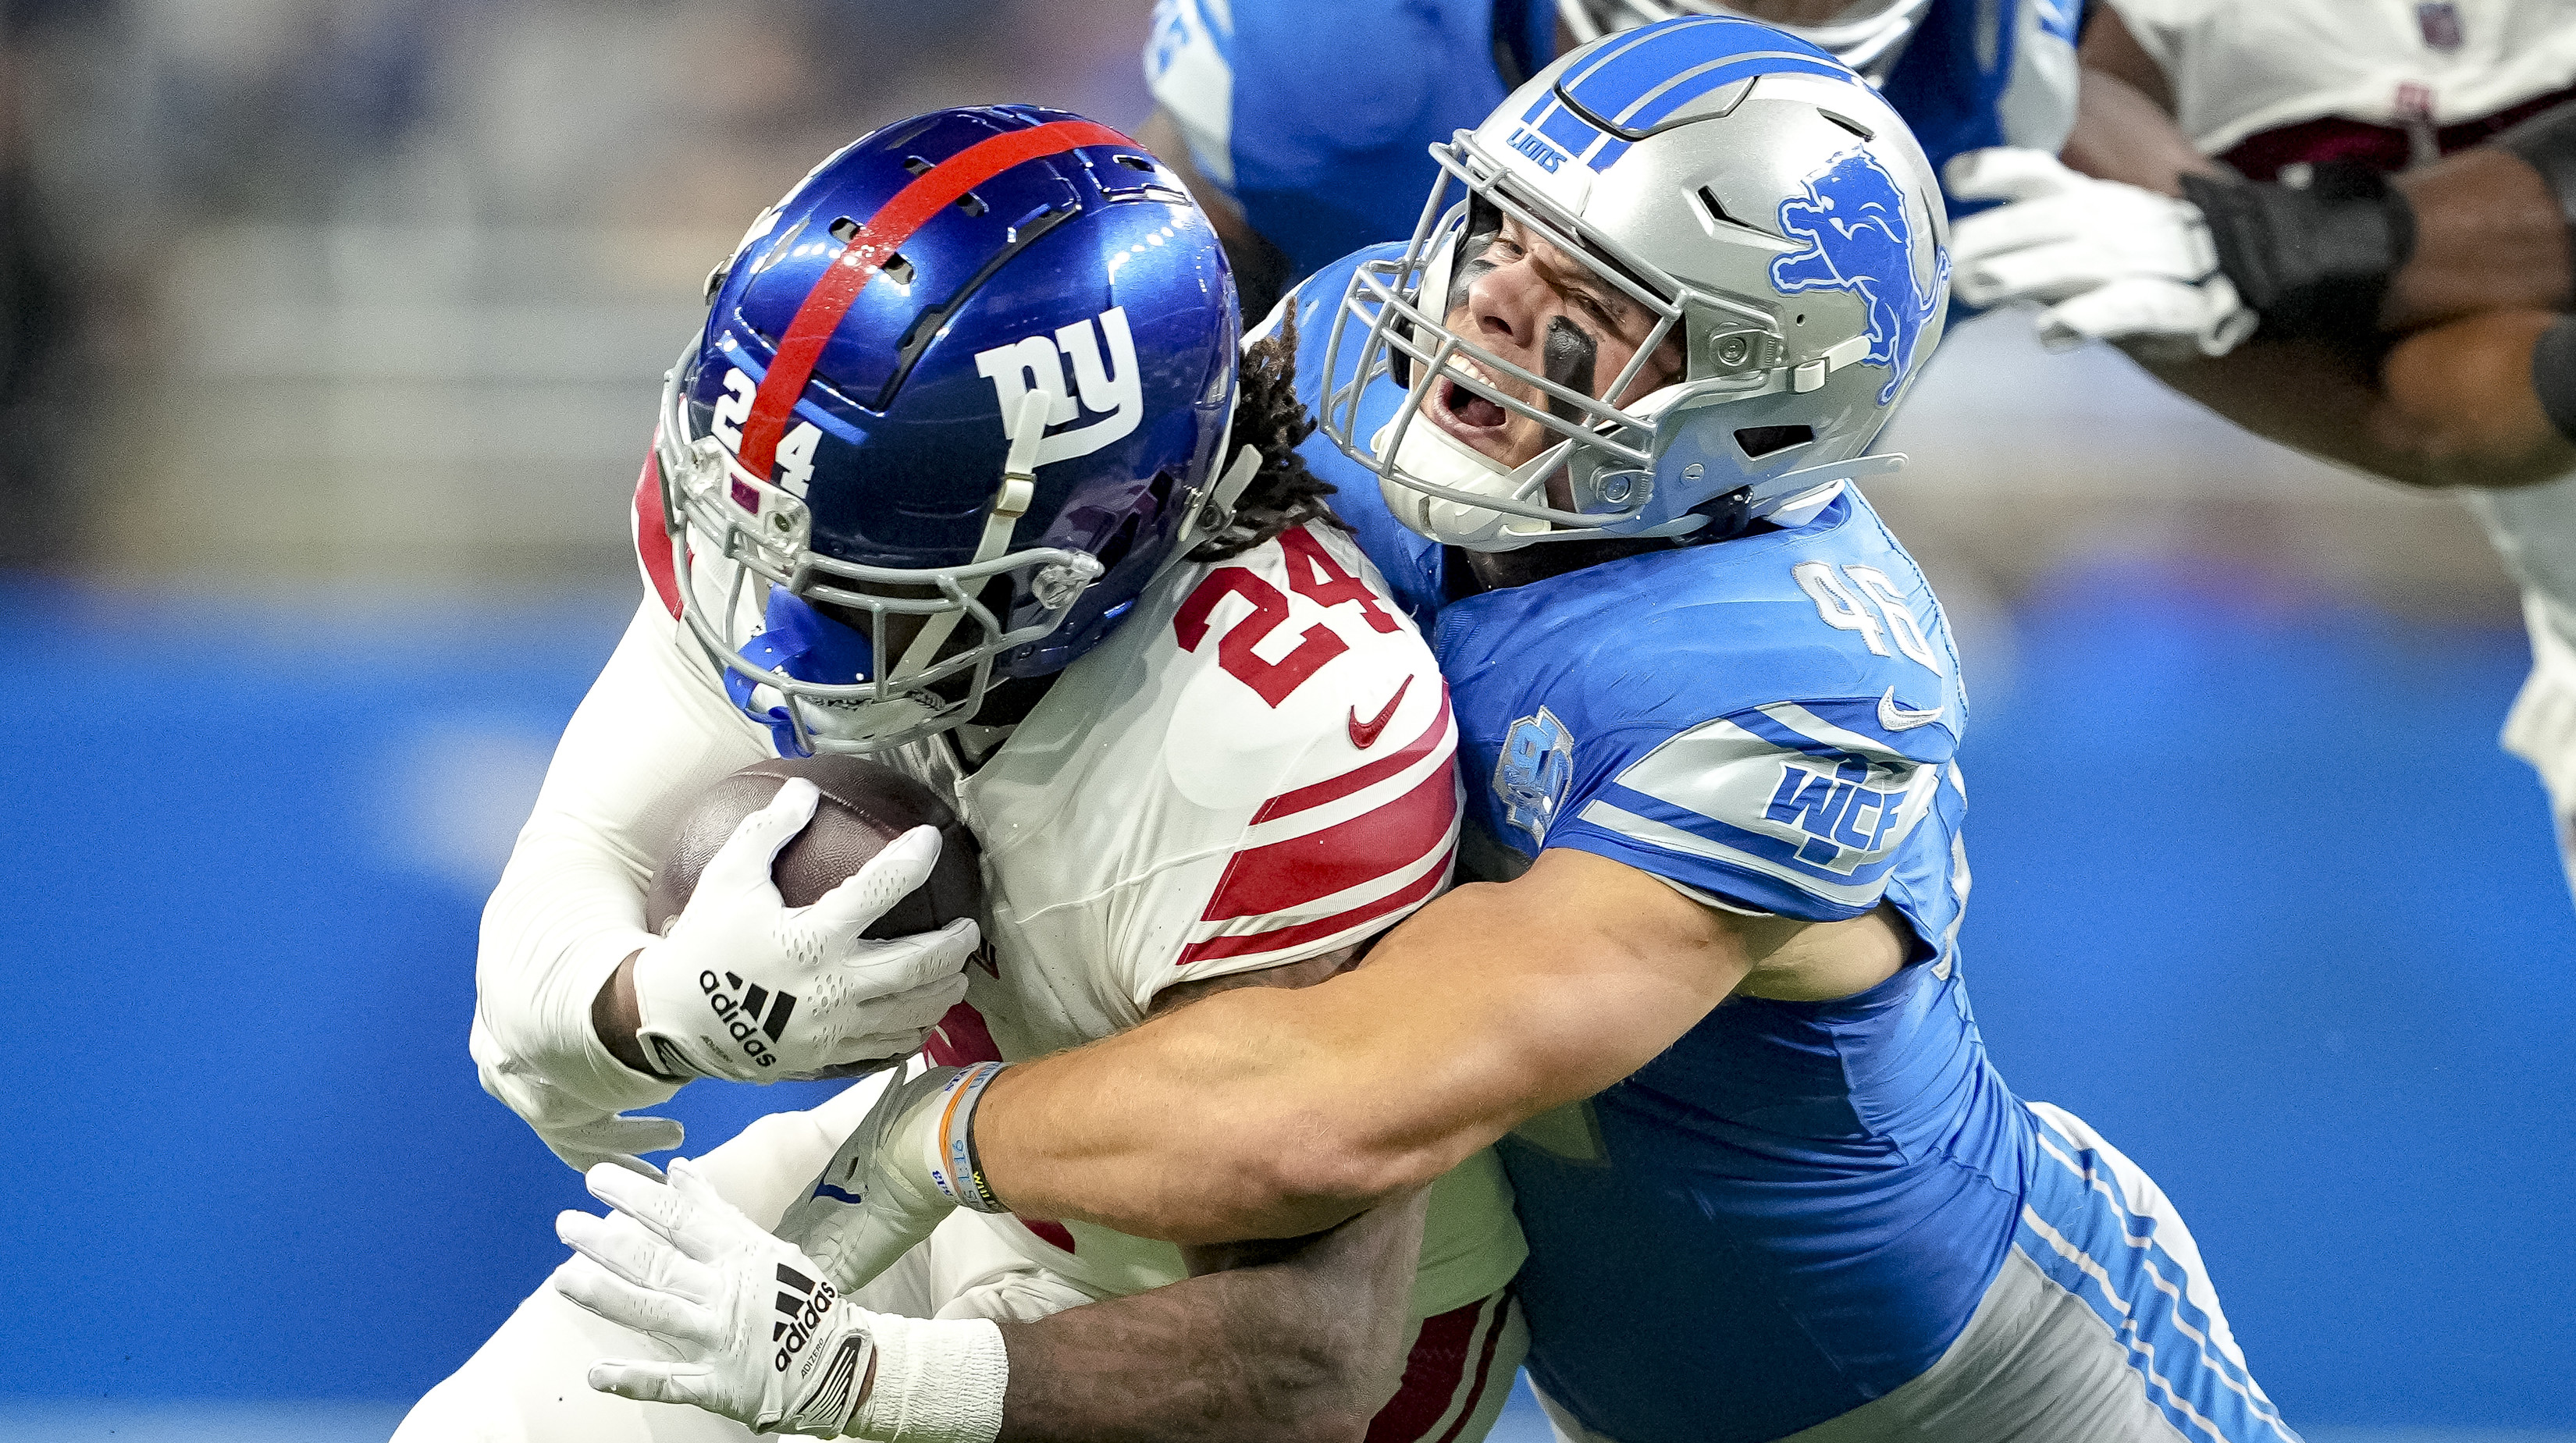 Giants at Lions: 5 things we learned from the Giants' 21-16 loss